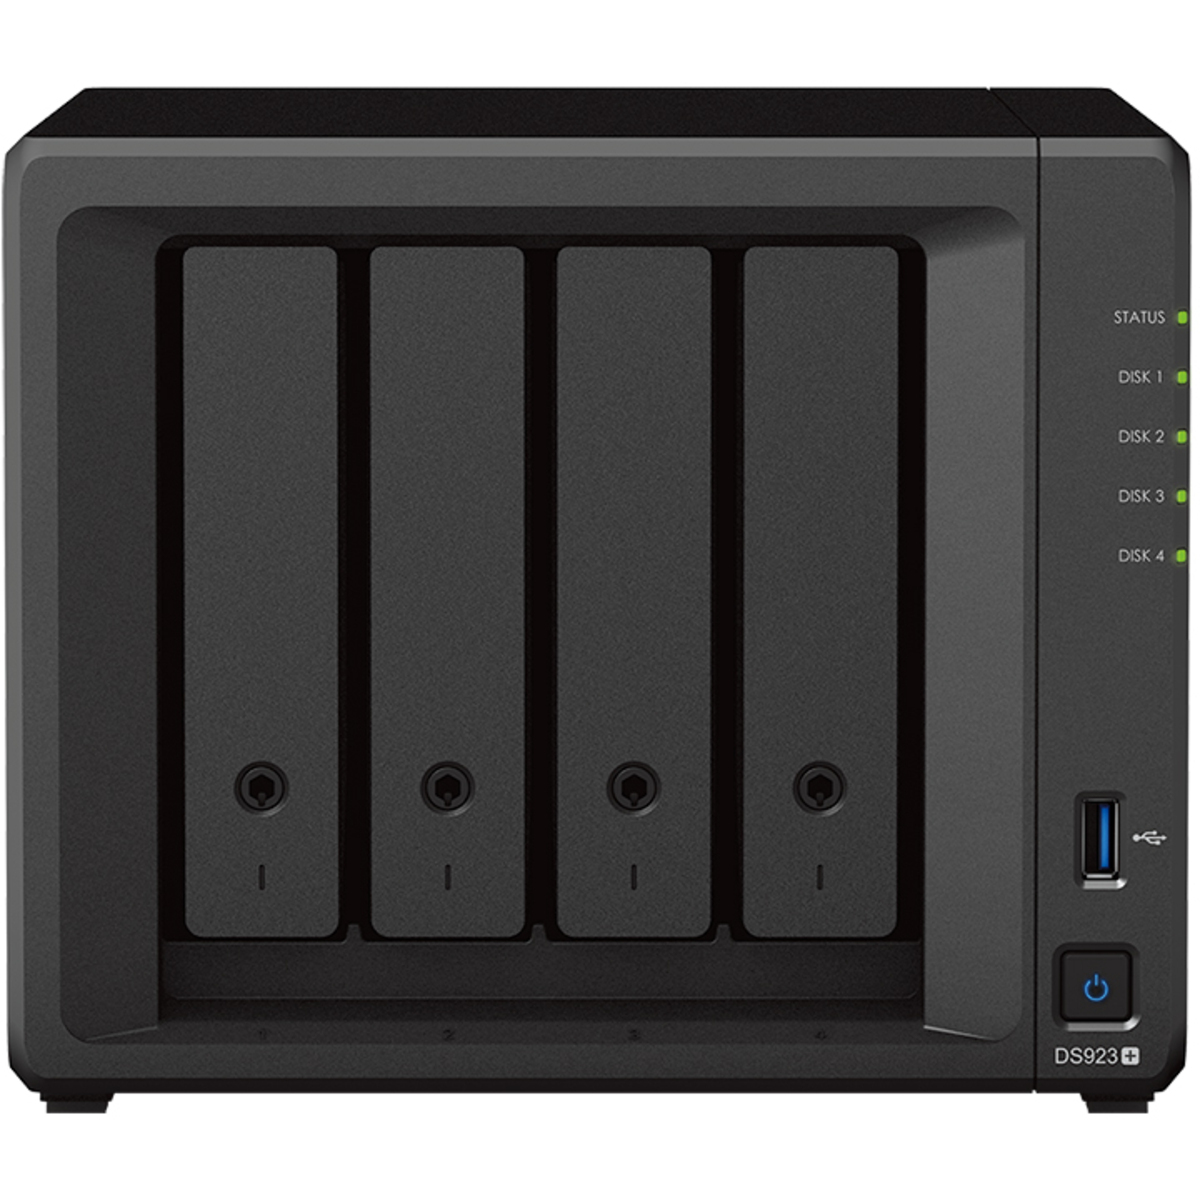 Synology DiskStation DS923+ 56tb 4-Bay Desktop Multimedia / Power User / Business NAS - Network Attached Storage Device 4x14tb Seagate IronWolf Pro ST14000NT001 3.5 7200rpm SATA 6Gb/s HDD NAS Class Drives Installed - Burn-In Tested - ON SALE - FREE RAM UPGRADE DiskStation DS923+